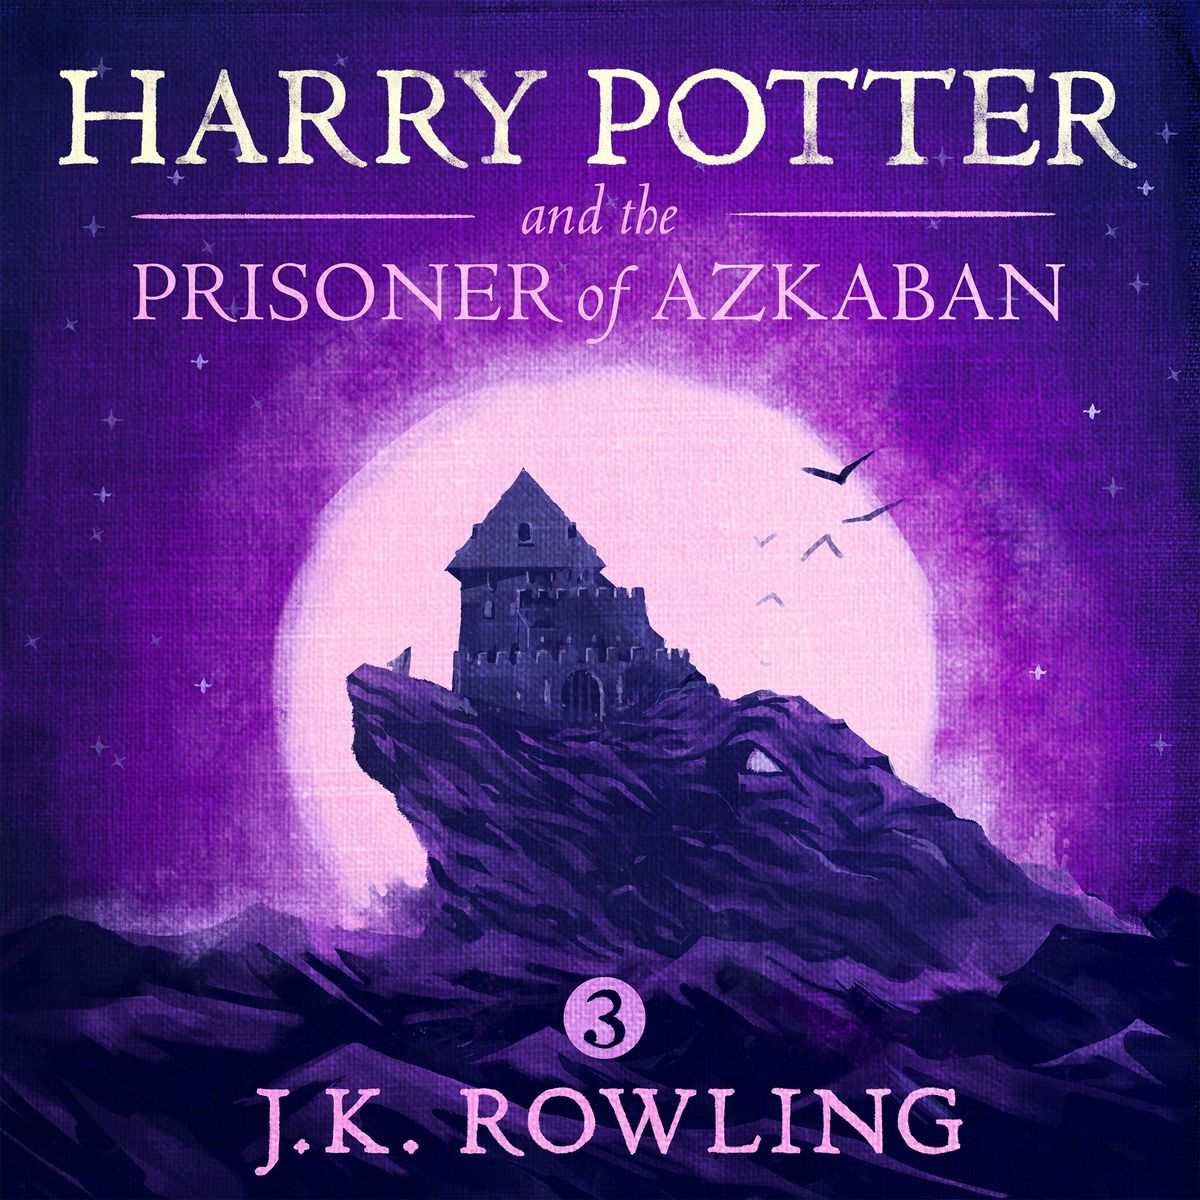 book review harry potter and the prisoner of azkaban